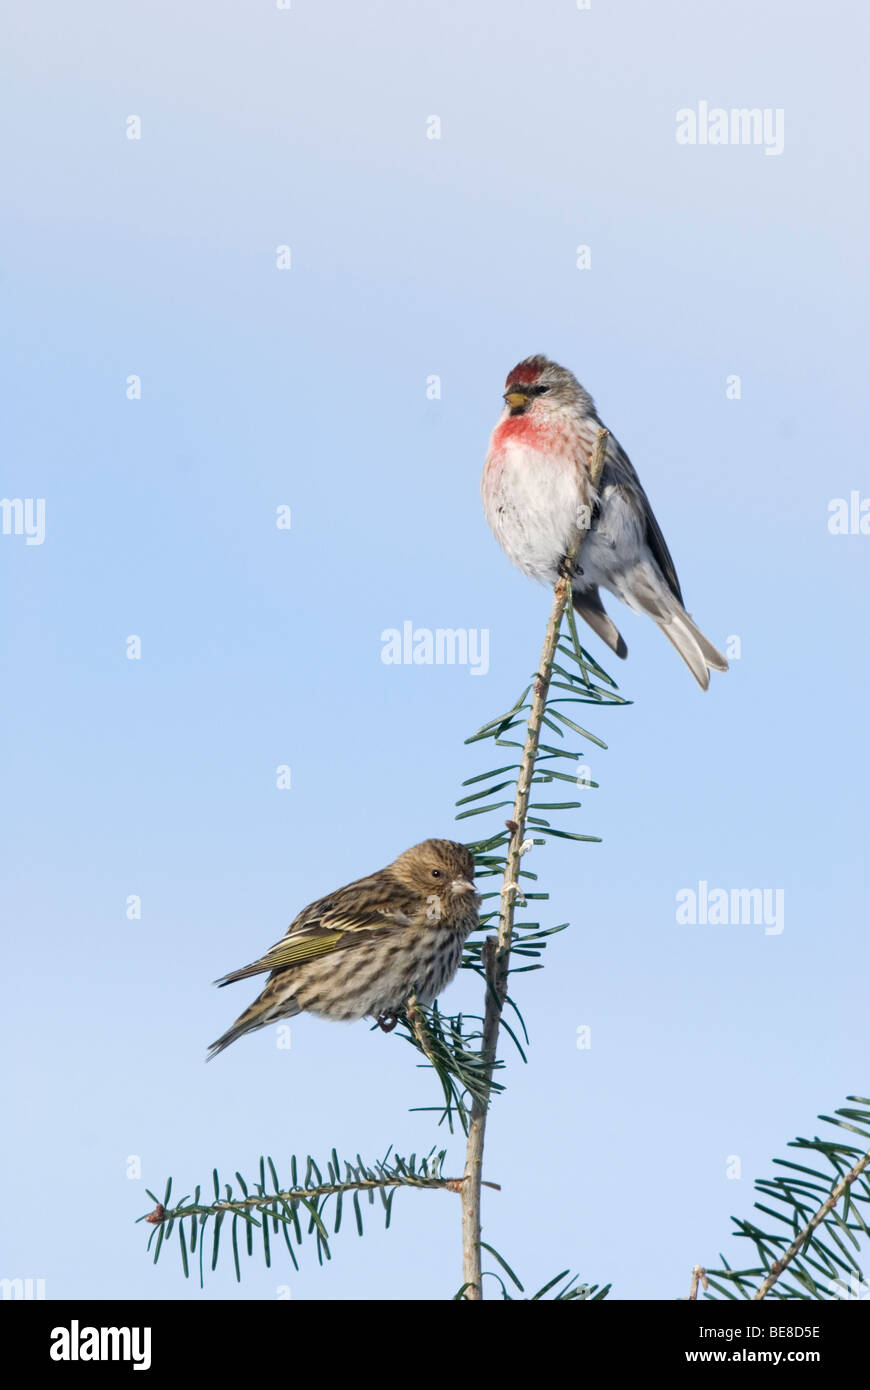 Een Dennensijs en Grote Barmsijs zittend in een boom,A Pine Siskin And Mealy Redpoll sitting in a tree. Stock Photo